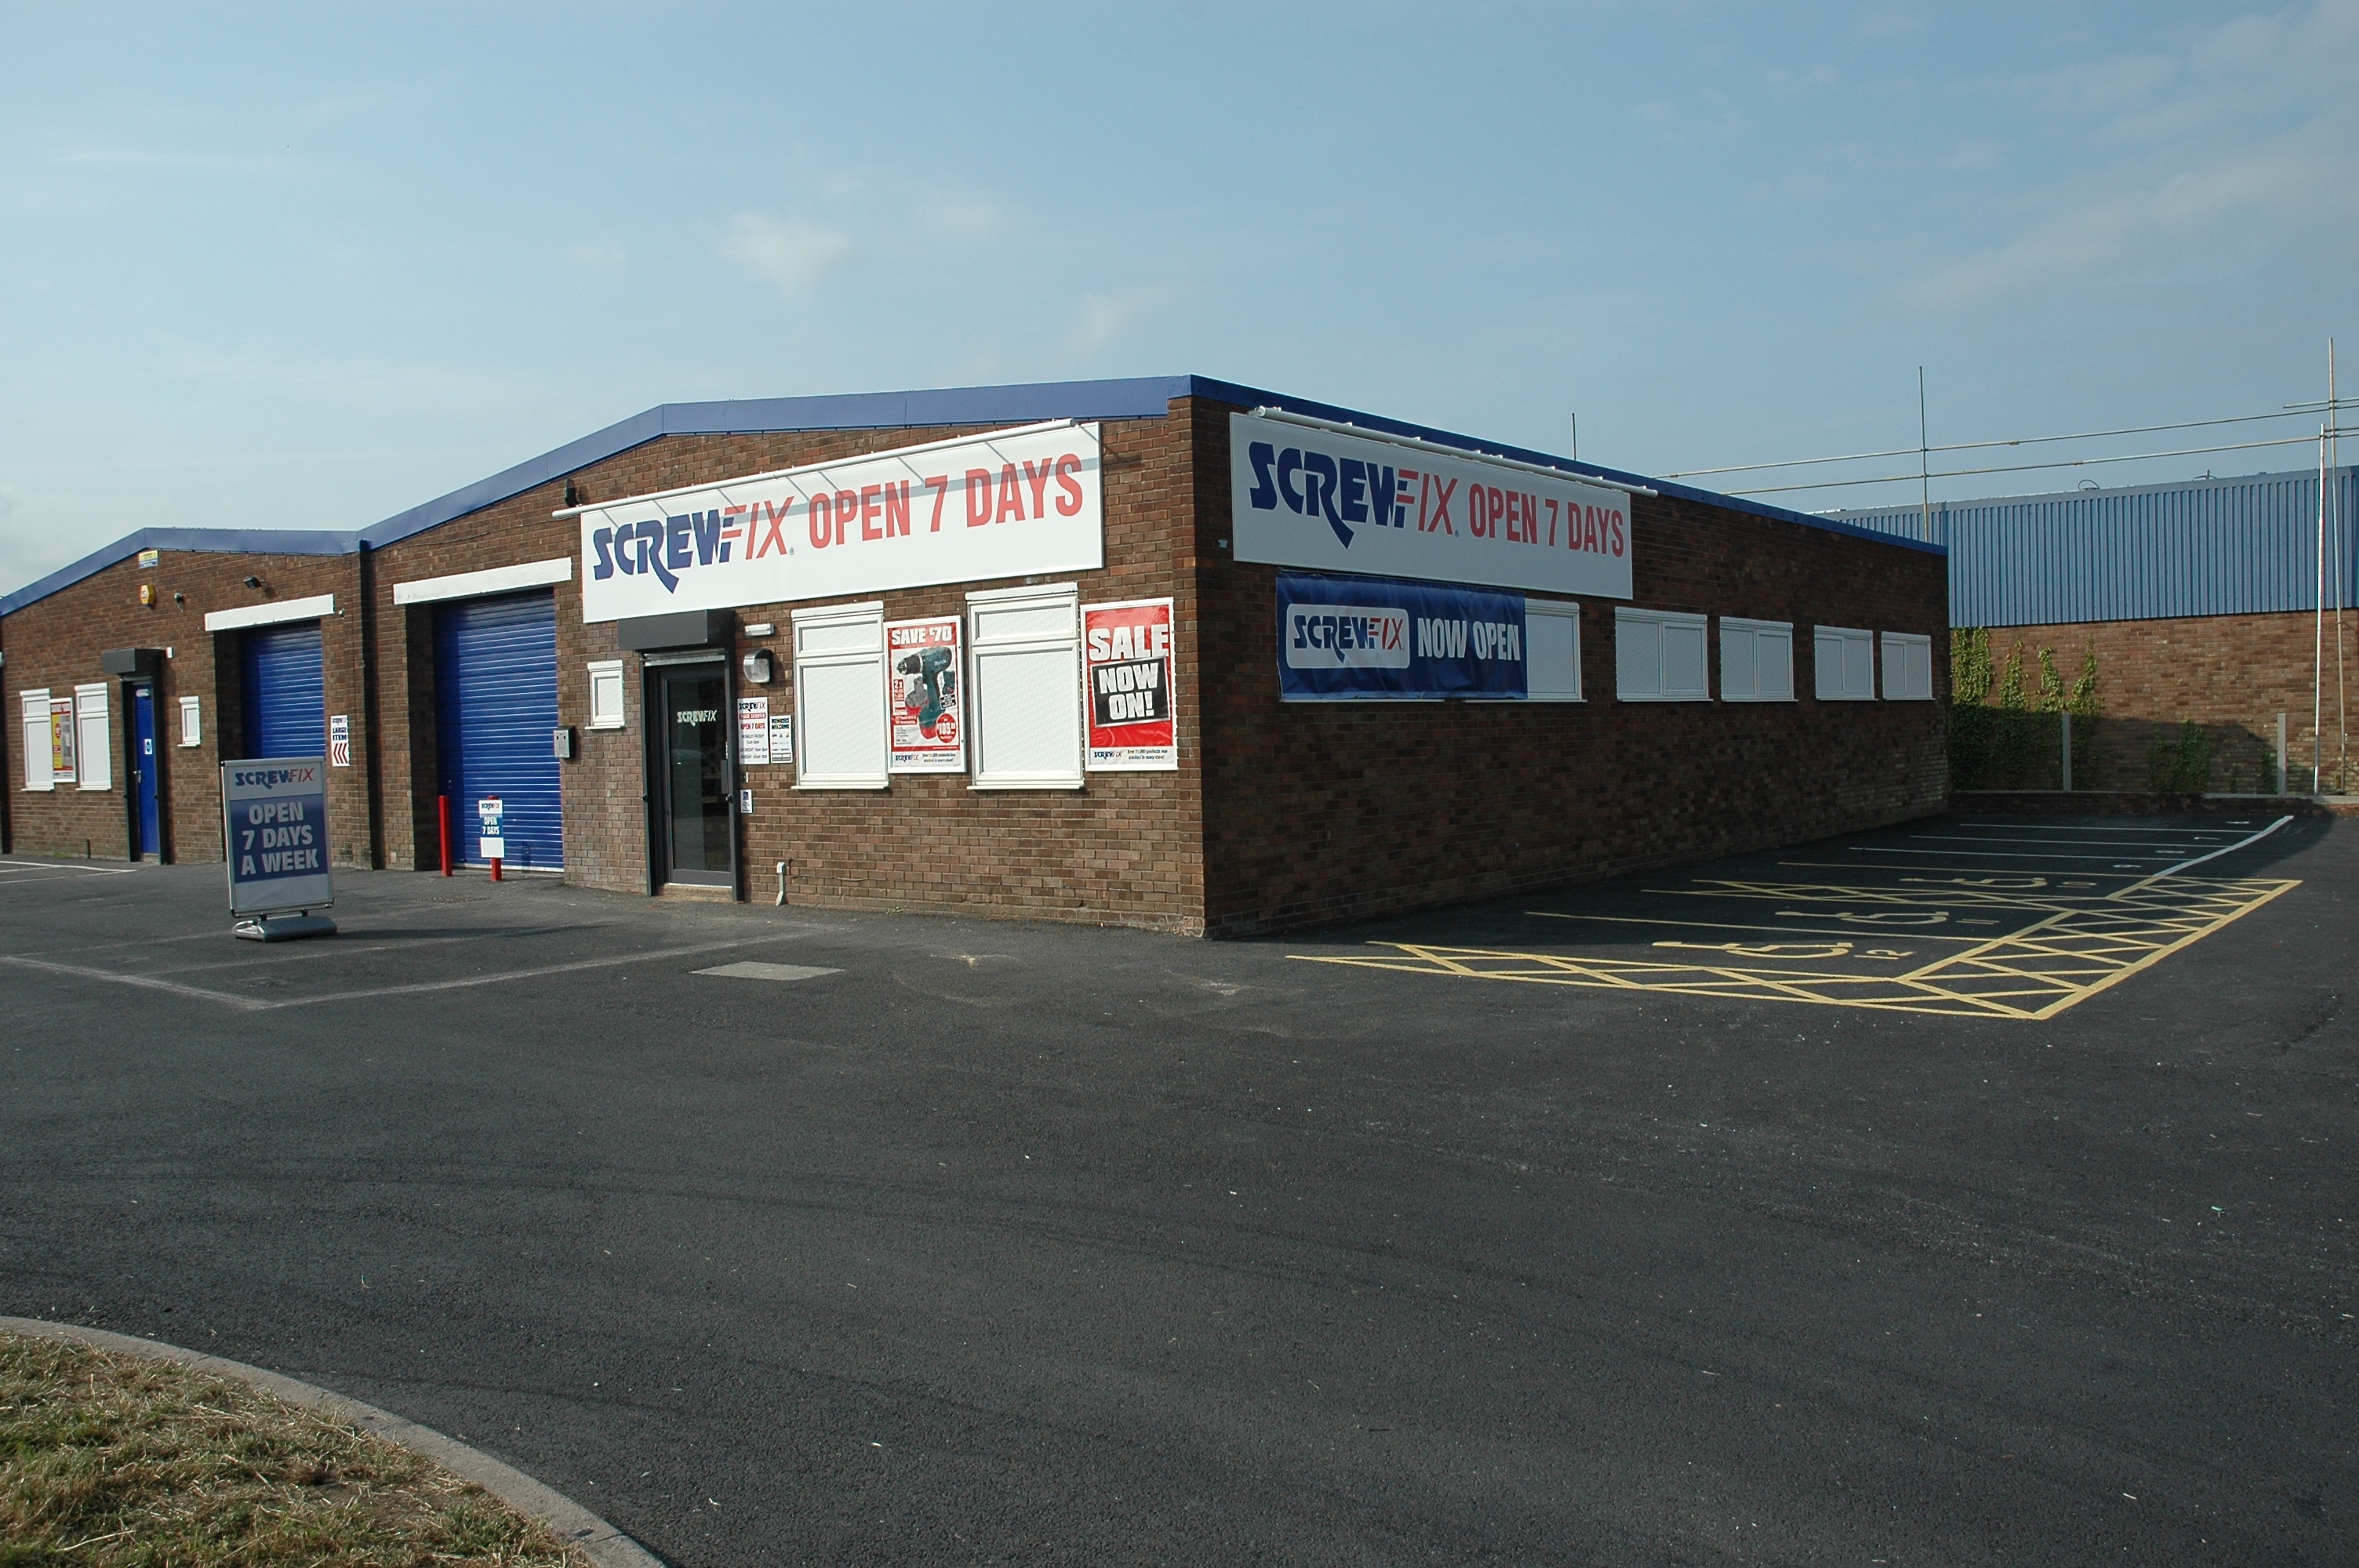 Witham ford garage #9